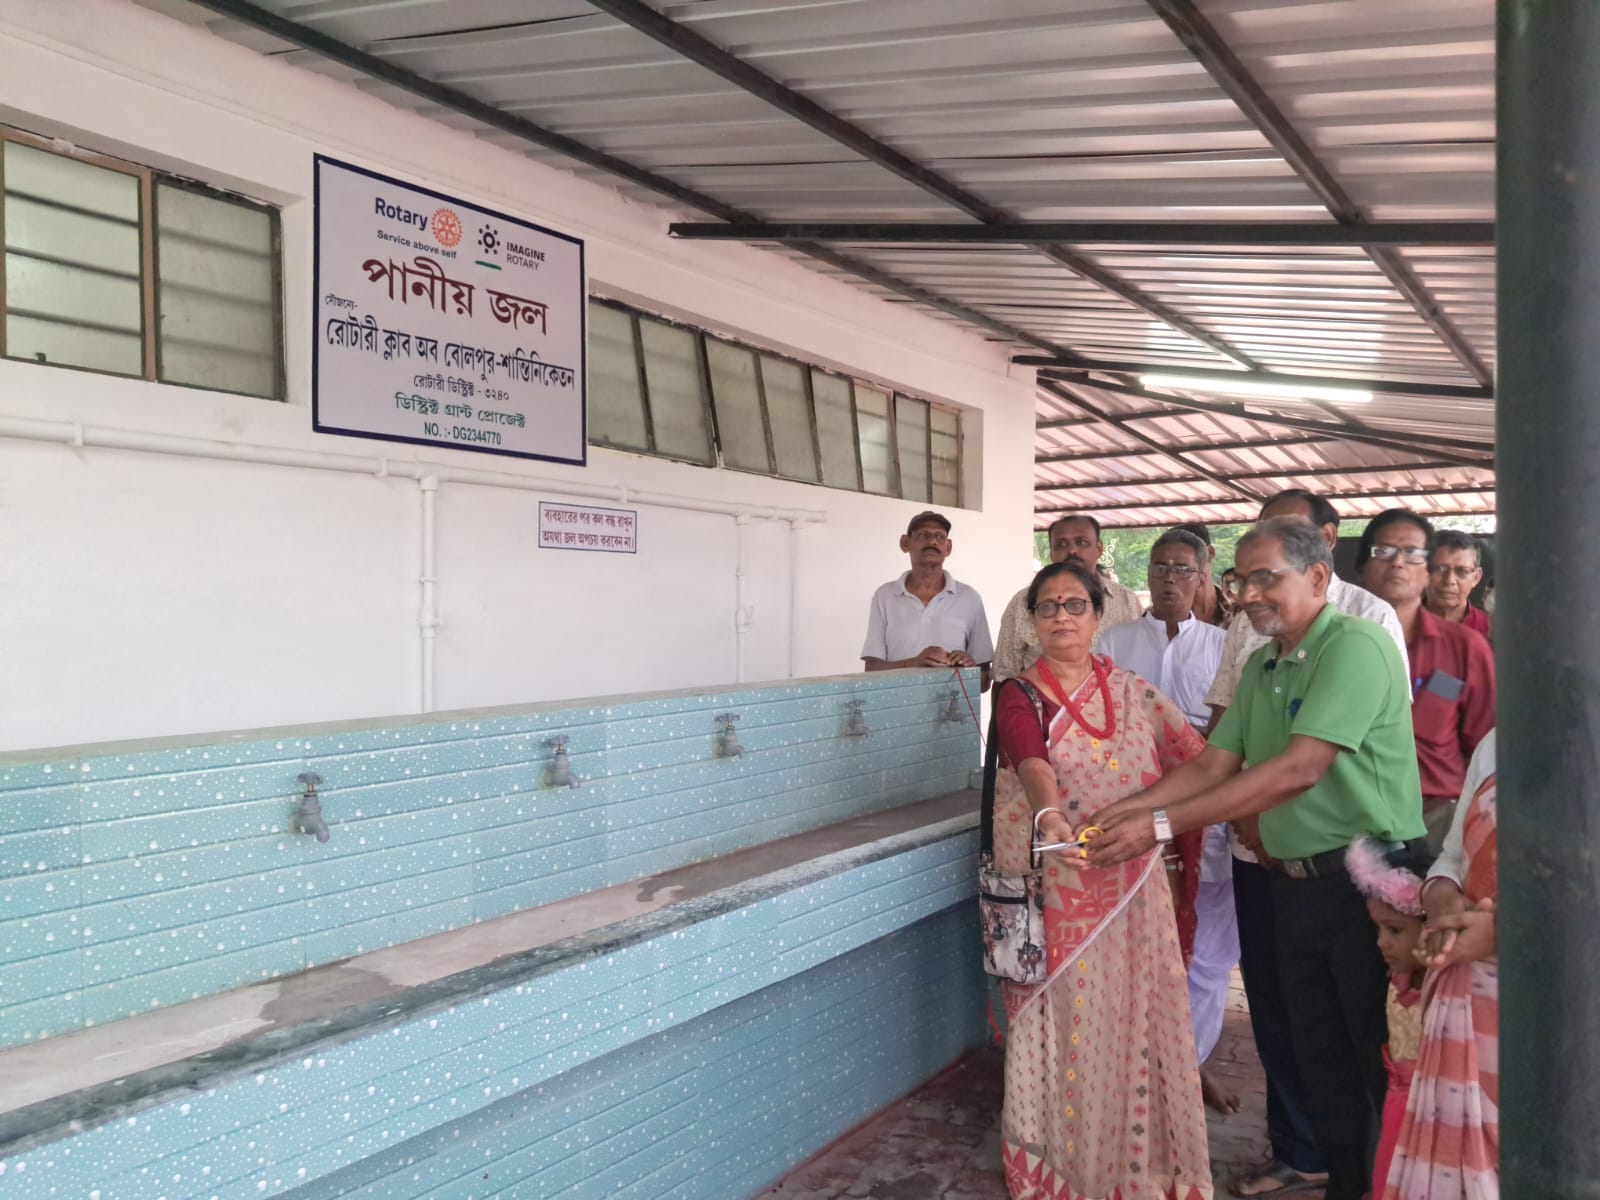 INAUGRATION OF DRINKING WATER IN RURAL AREA